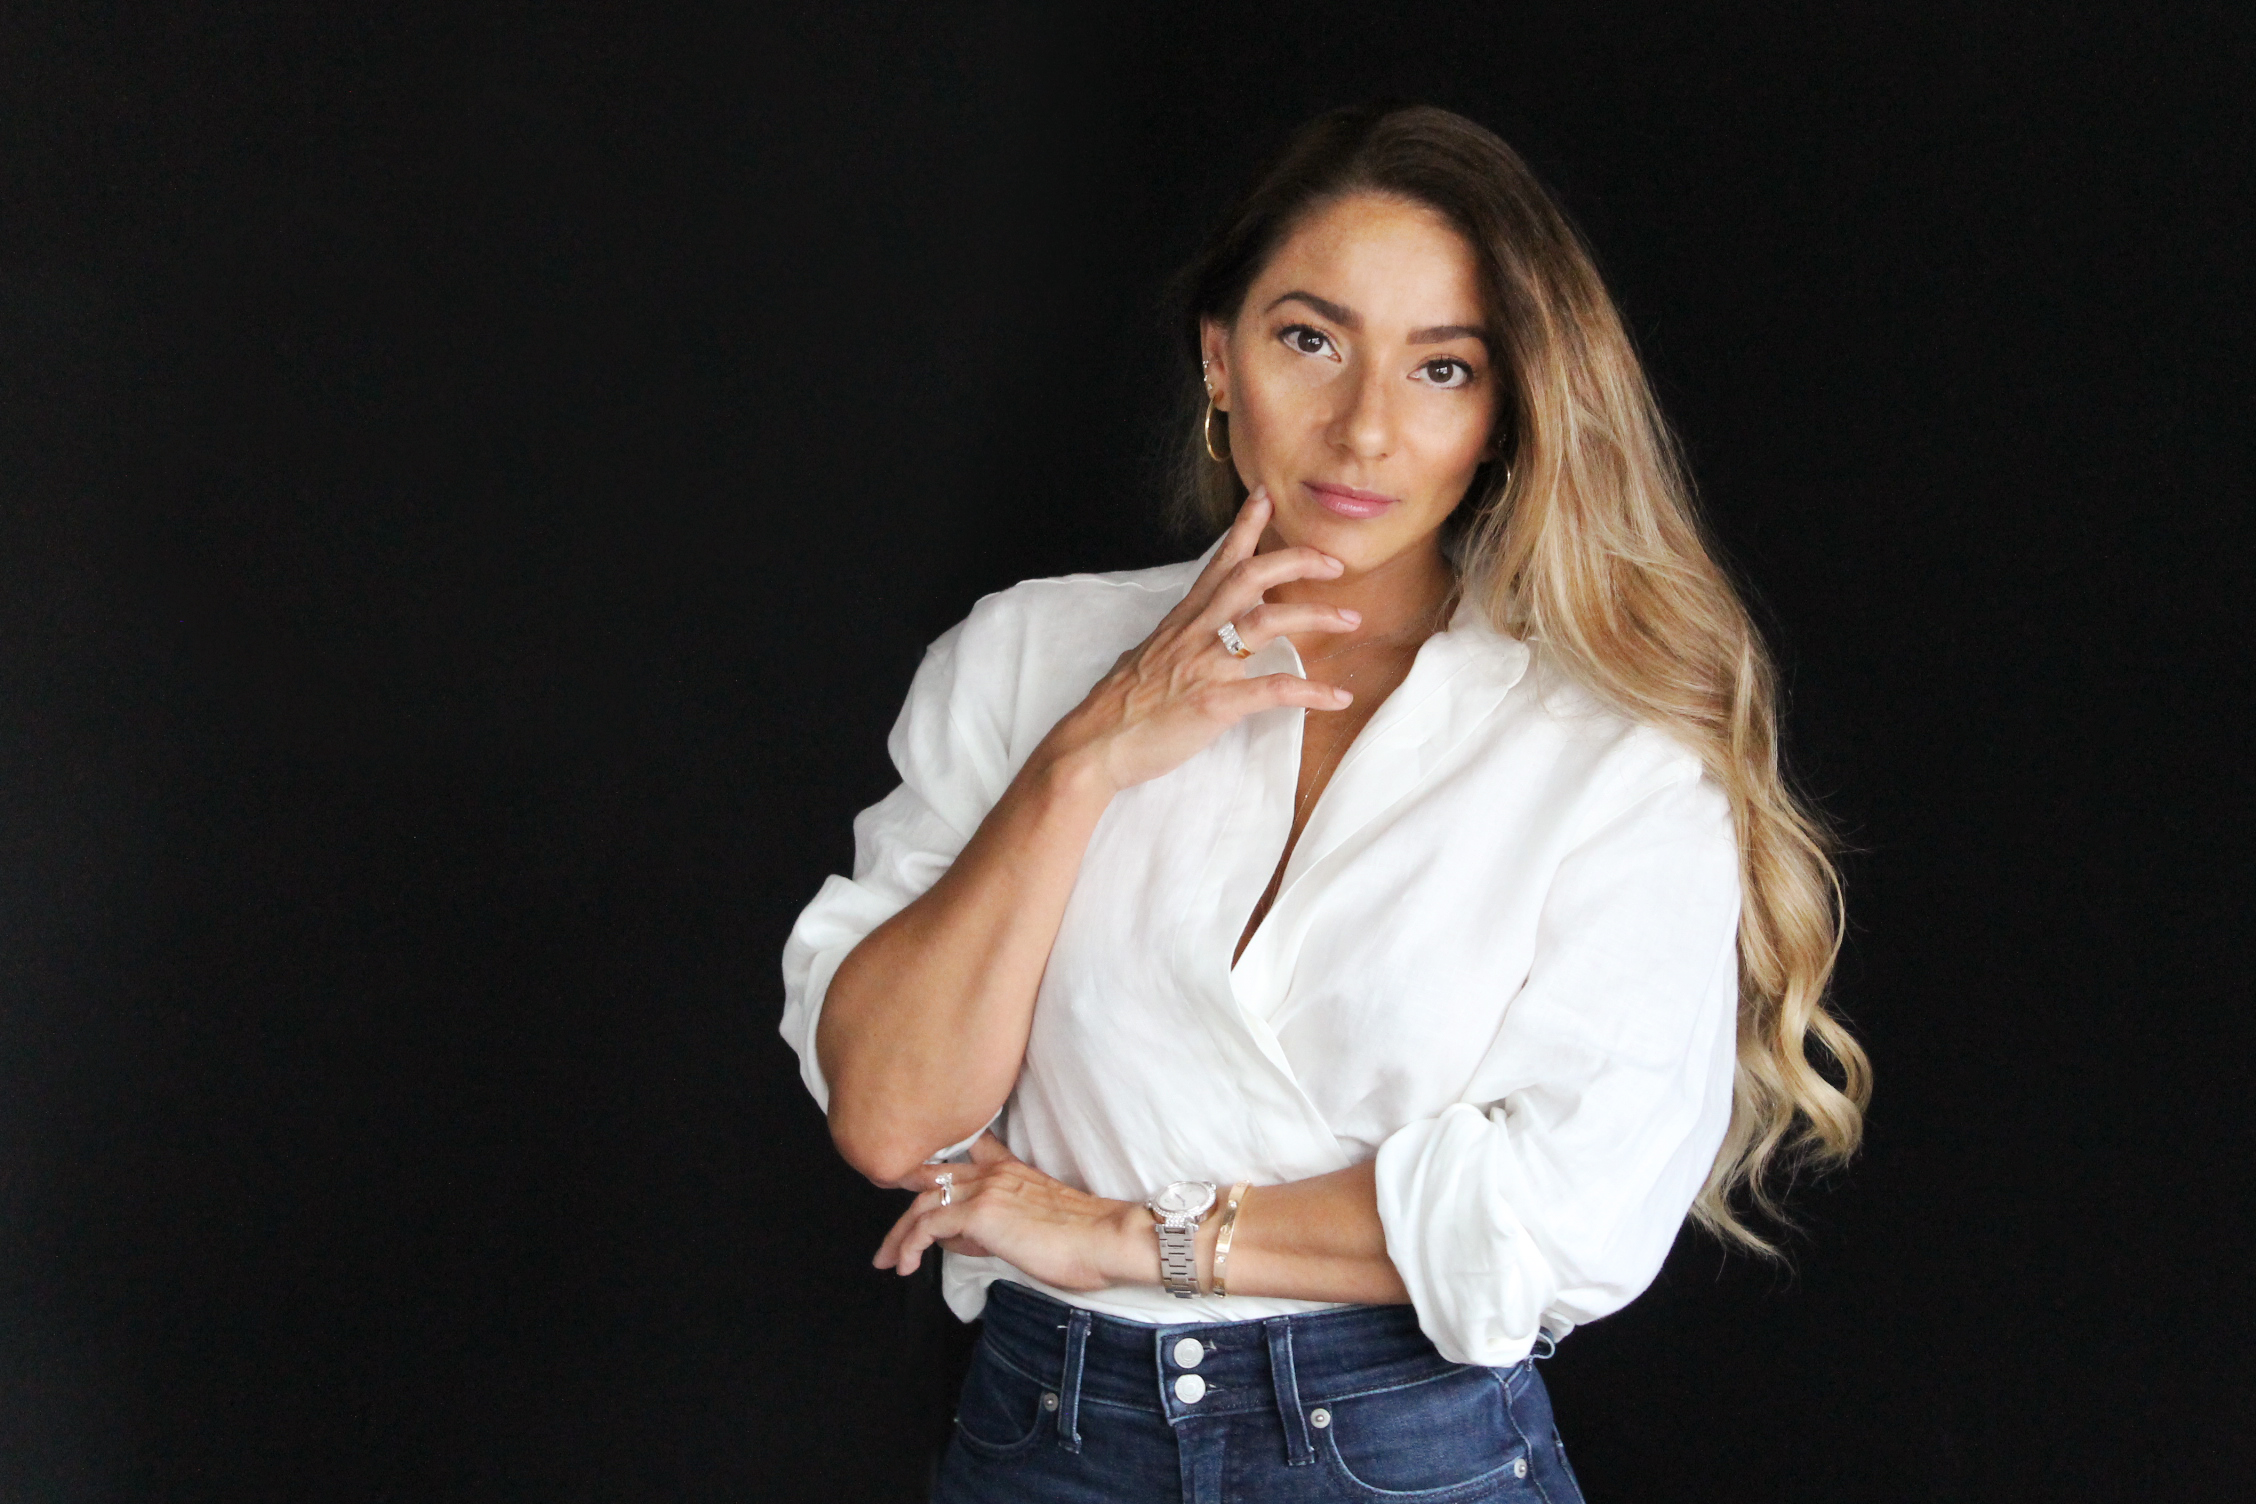 Conscious Jewelry Designer from NY Diamond District Shines in Tampa Bay